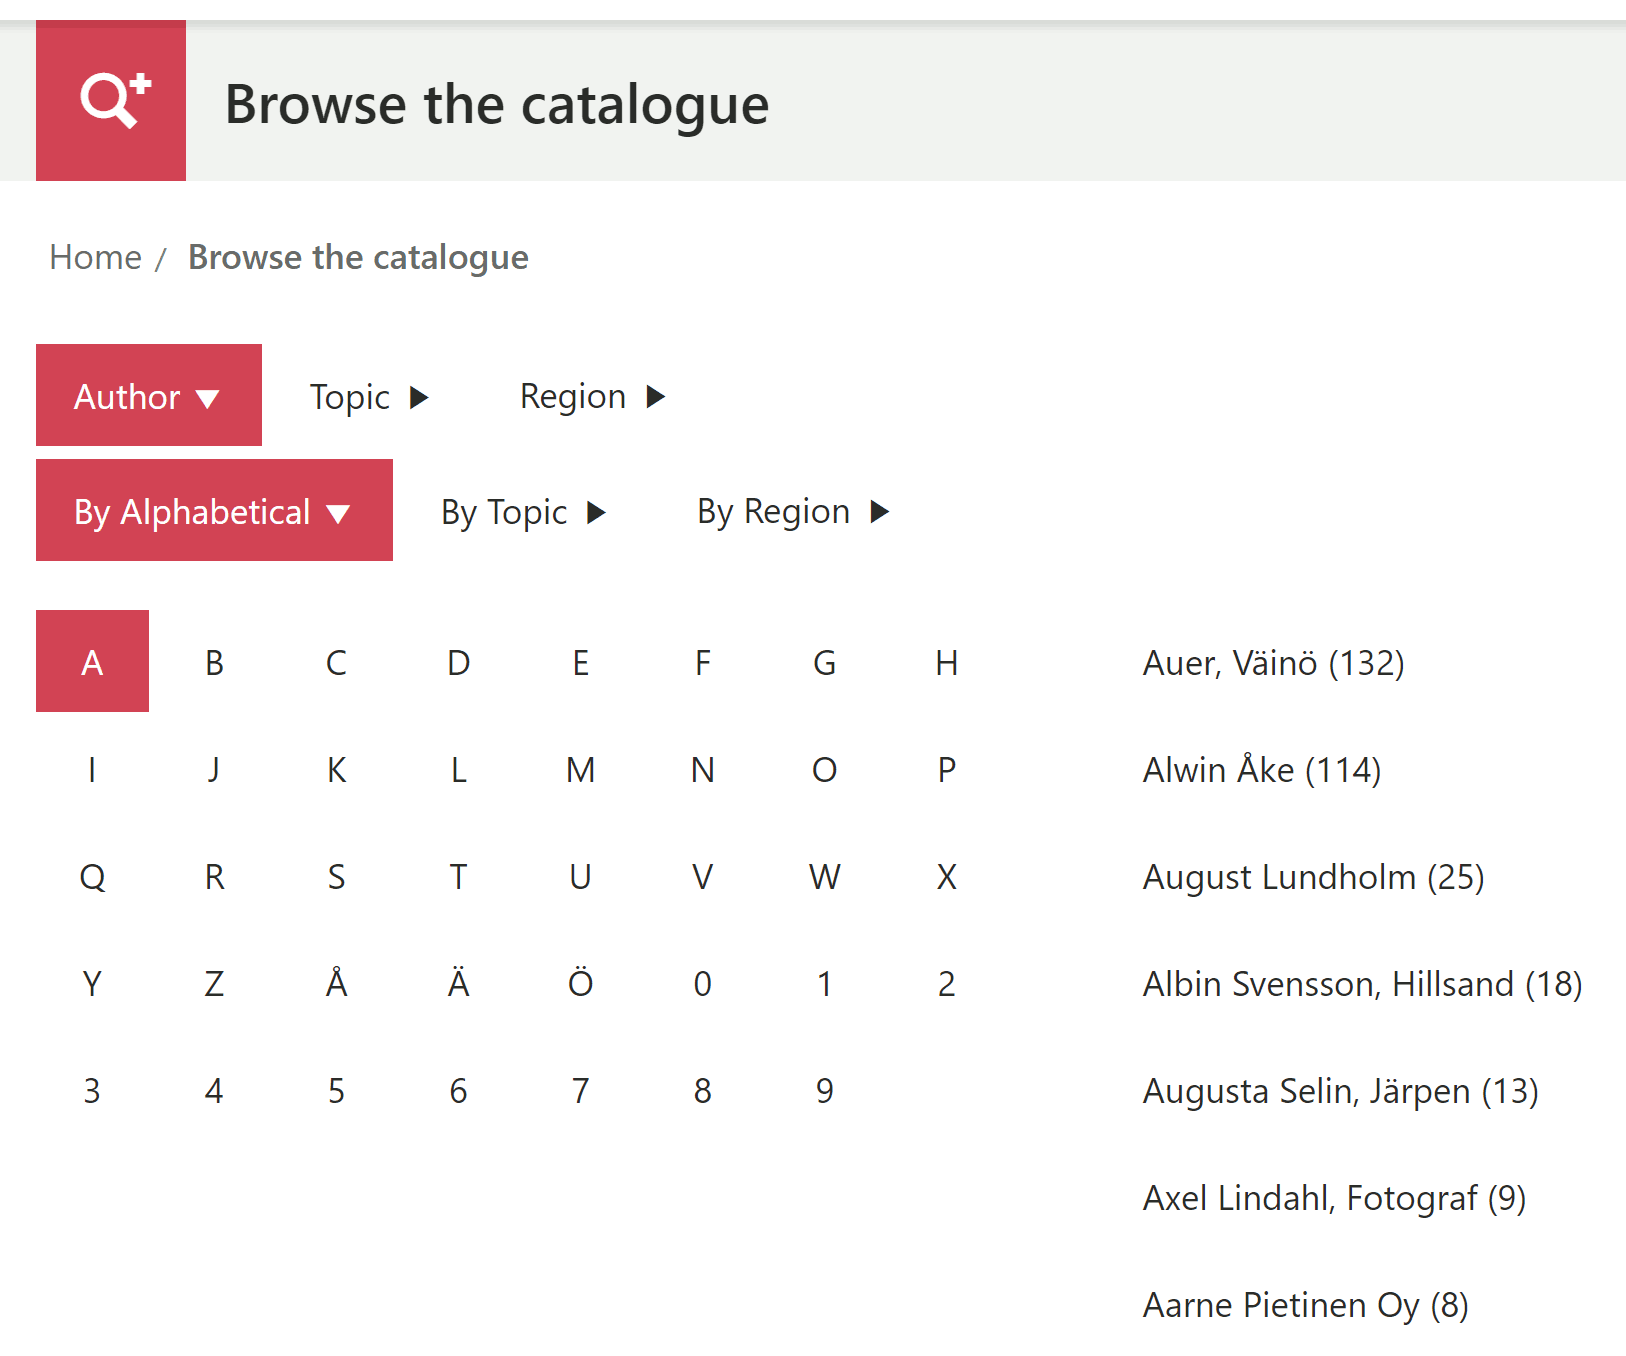 Browse the catalogue